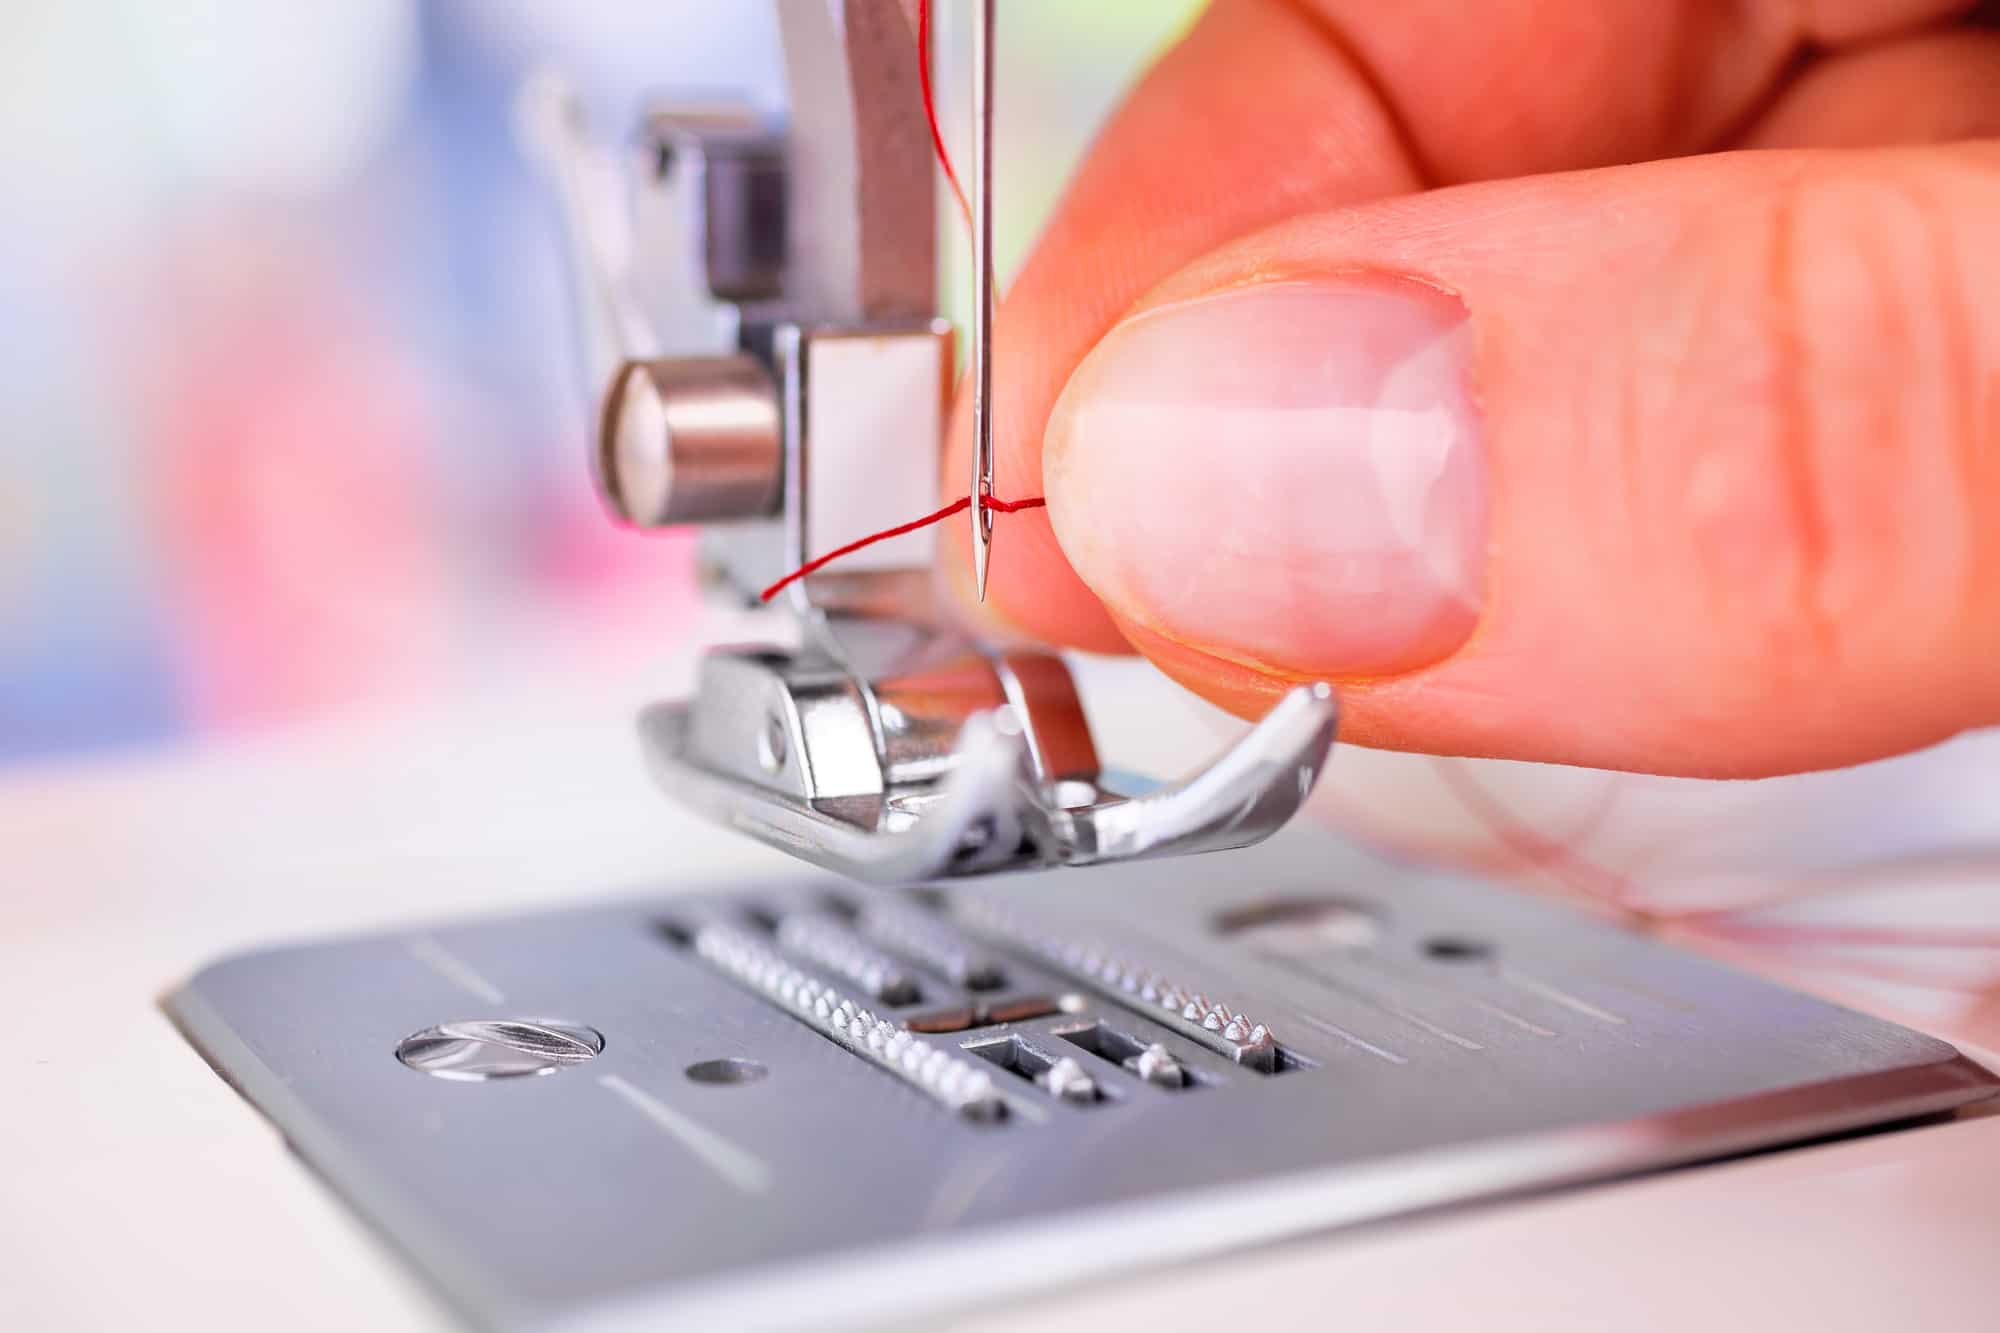 Step By Step Guide To Threading A Sewing Machine - Reverasite